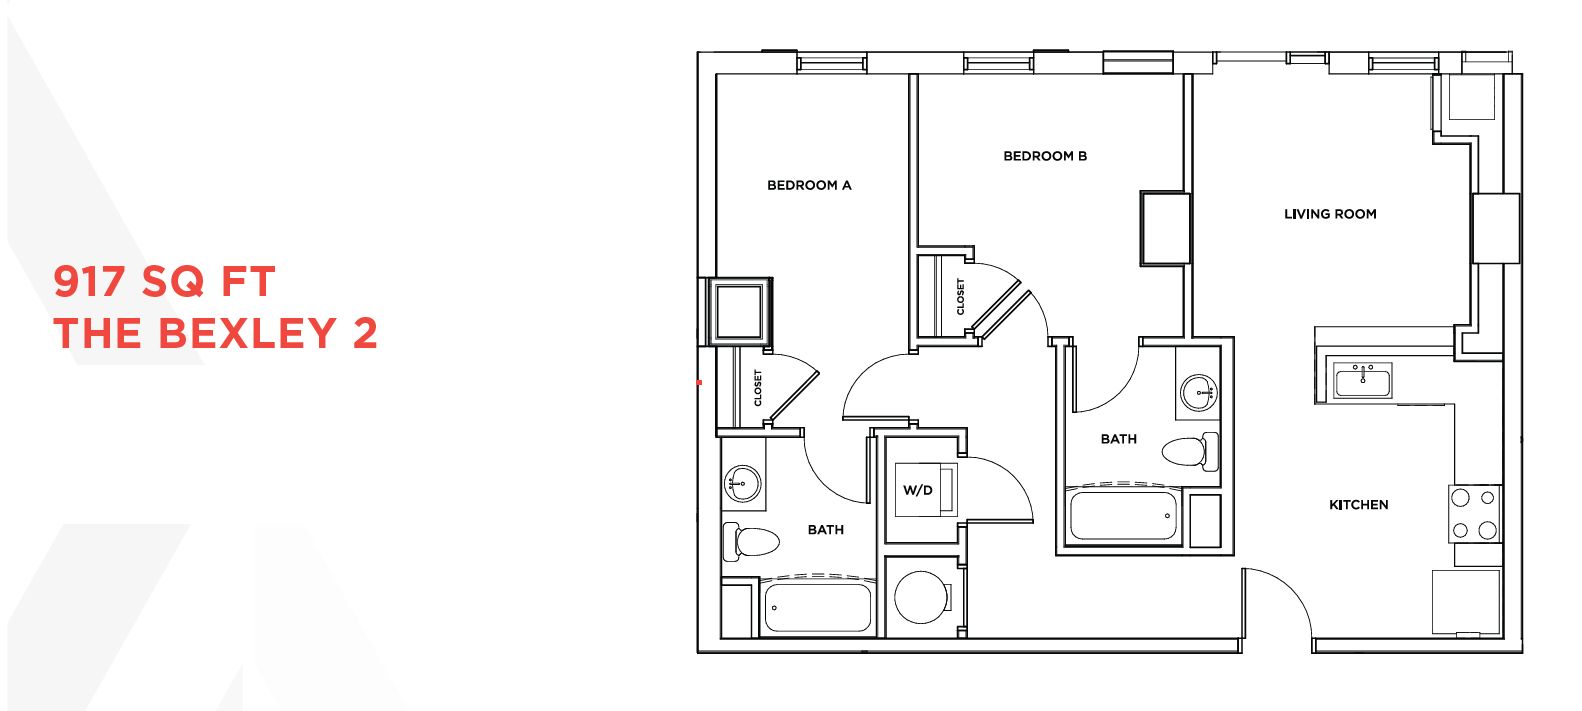 The Standard at Philadelphia at 119 South 31st Street. Floor plan of a two-bedroom apartment of type Bexley. Credit: Landmark Properties